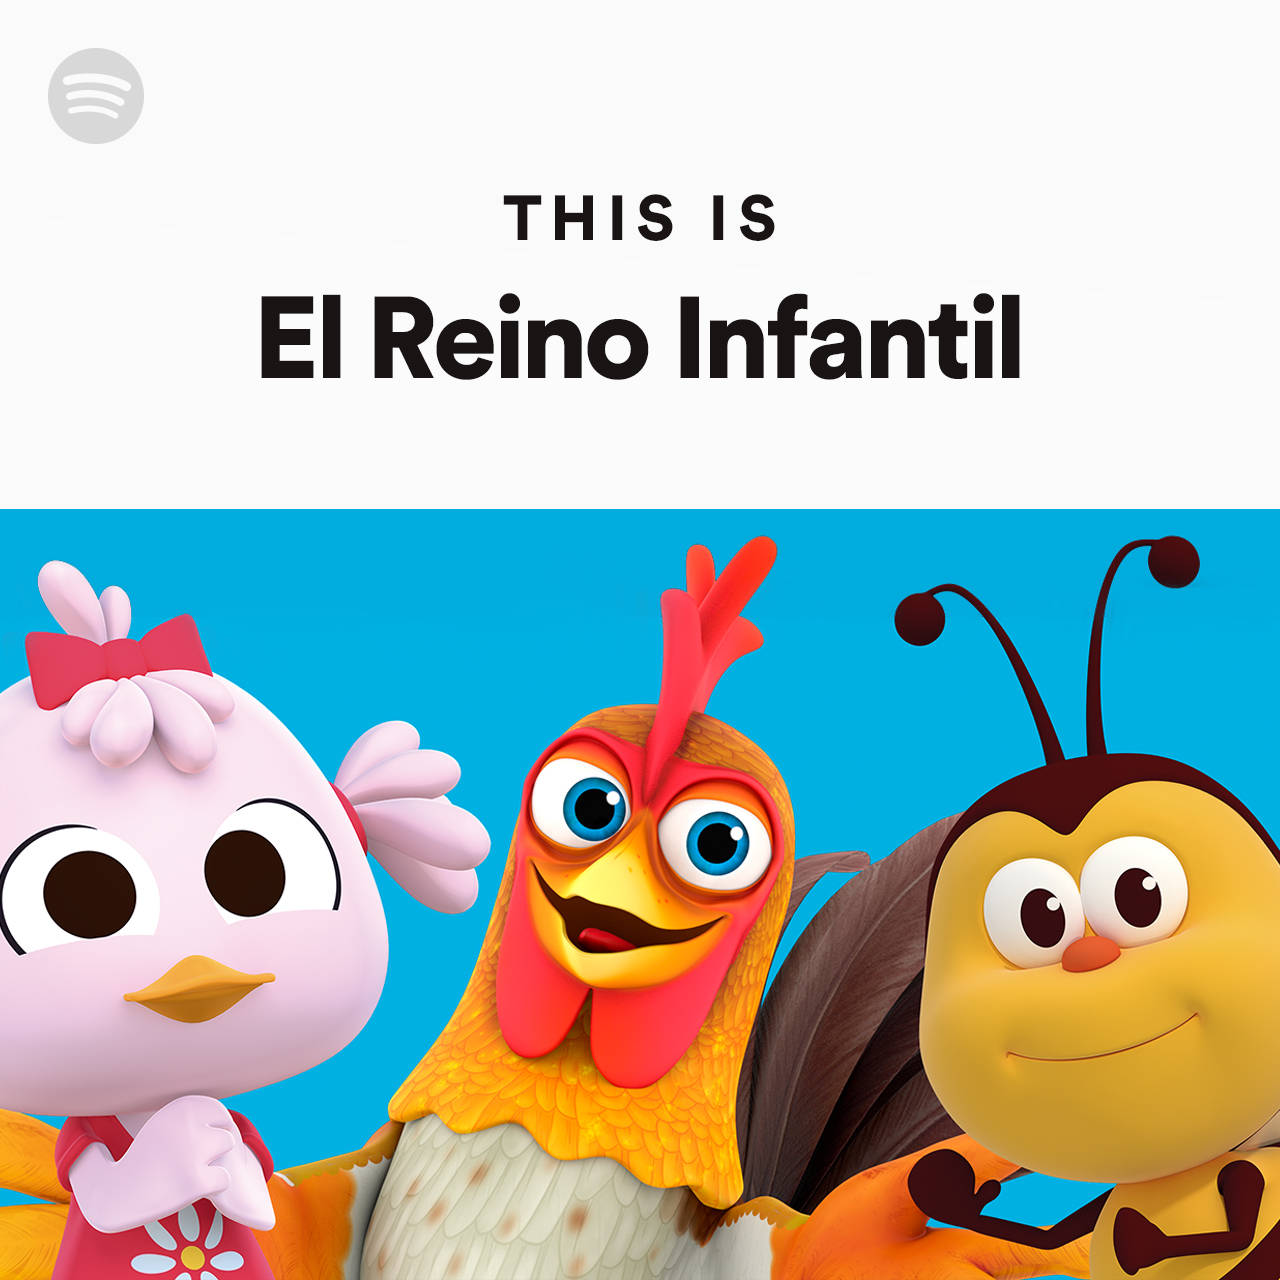 Elreino Infantil Chicken And Bee Would Translate To 